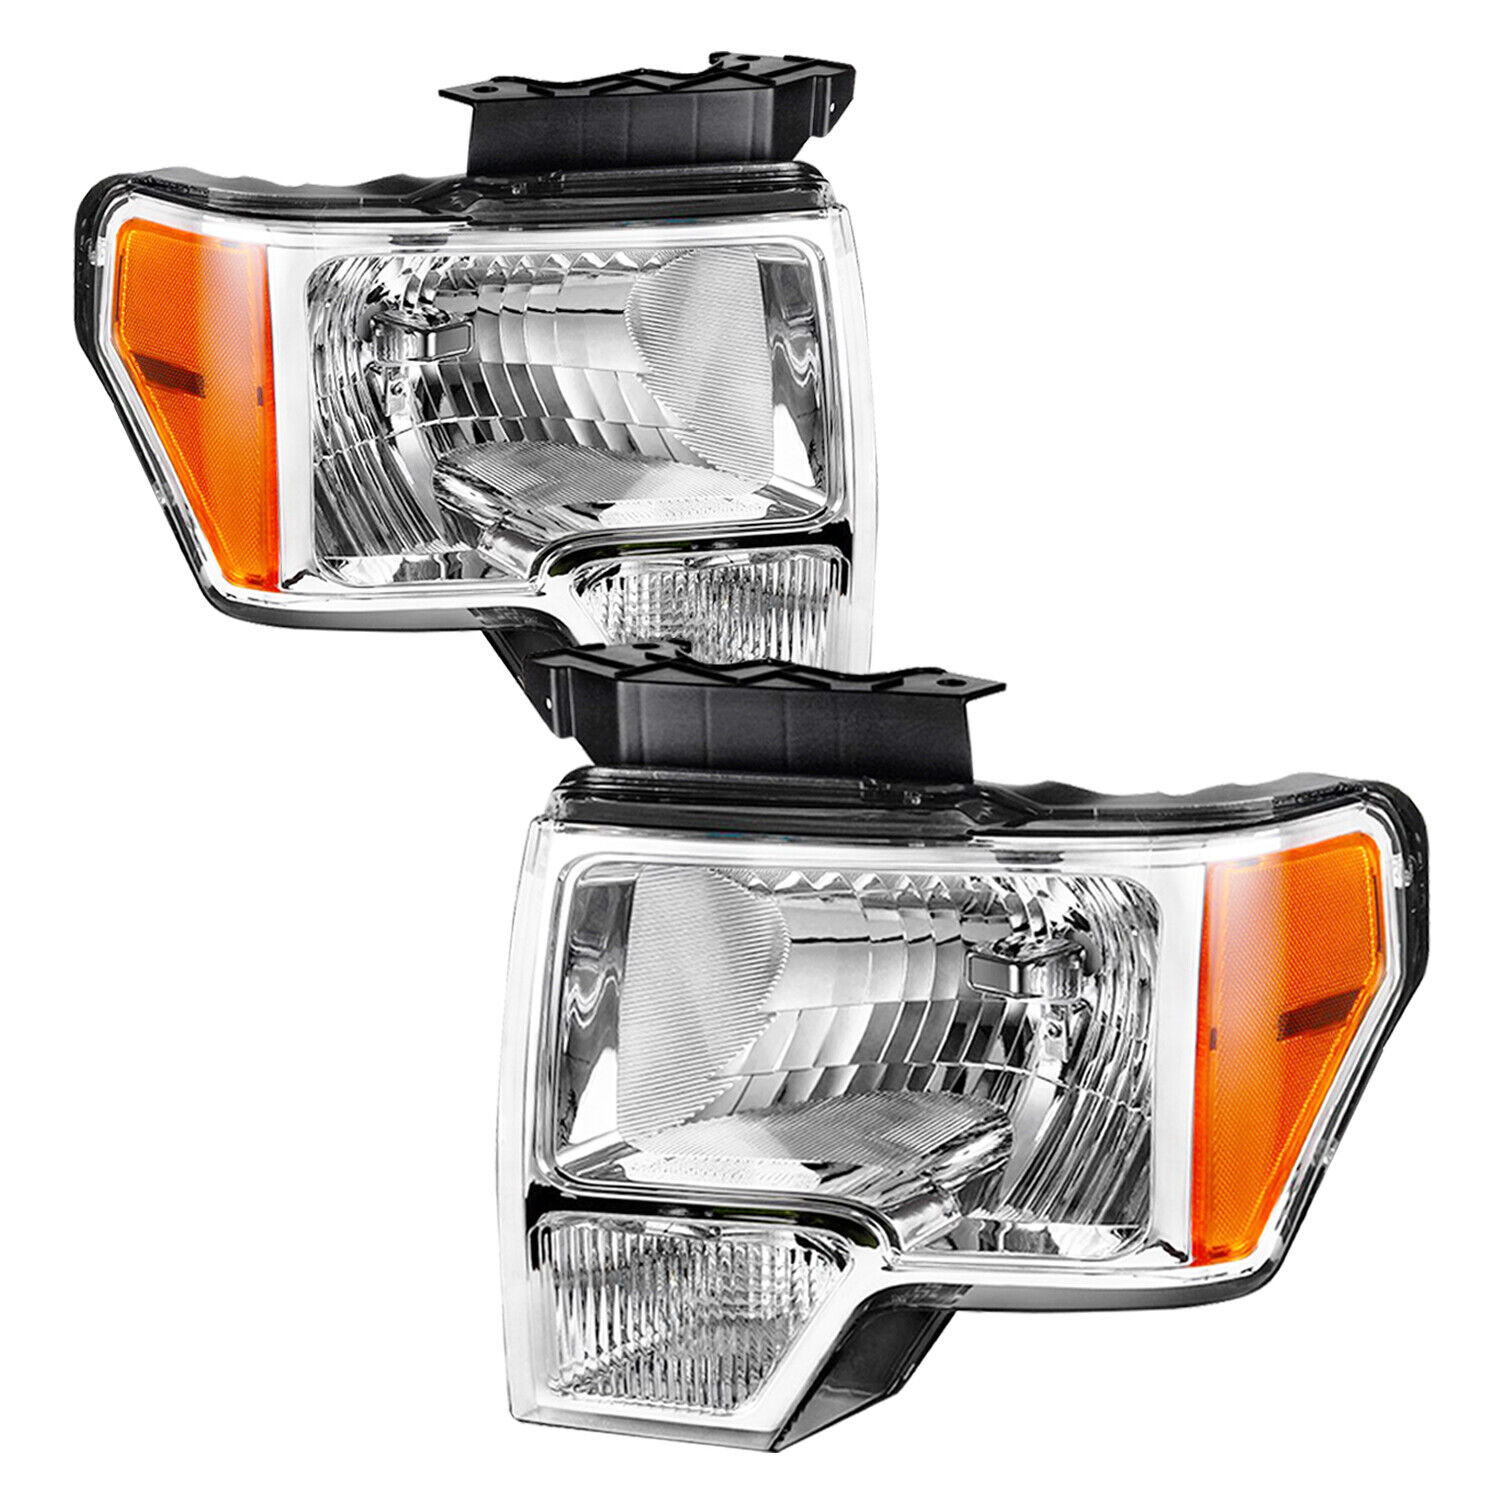 For 2009 2010 2011 2012 2013 2014 Ford F-150 F150 Pickup Chrome Headlights Pair